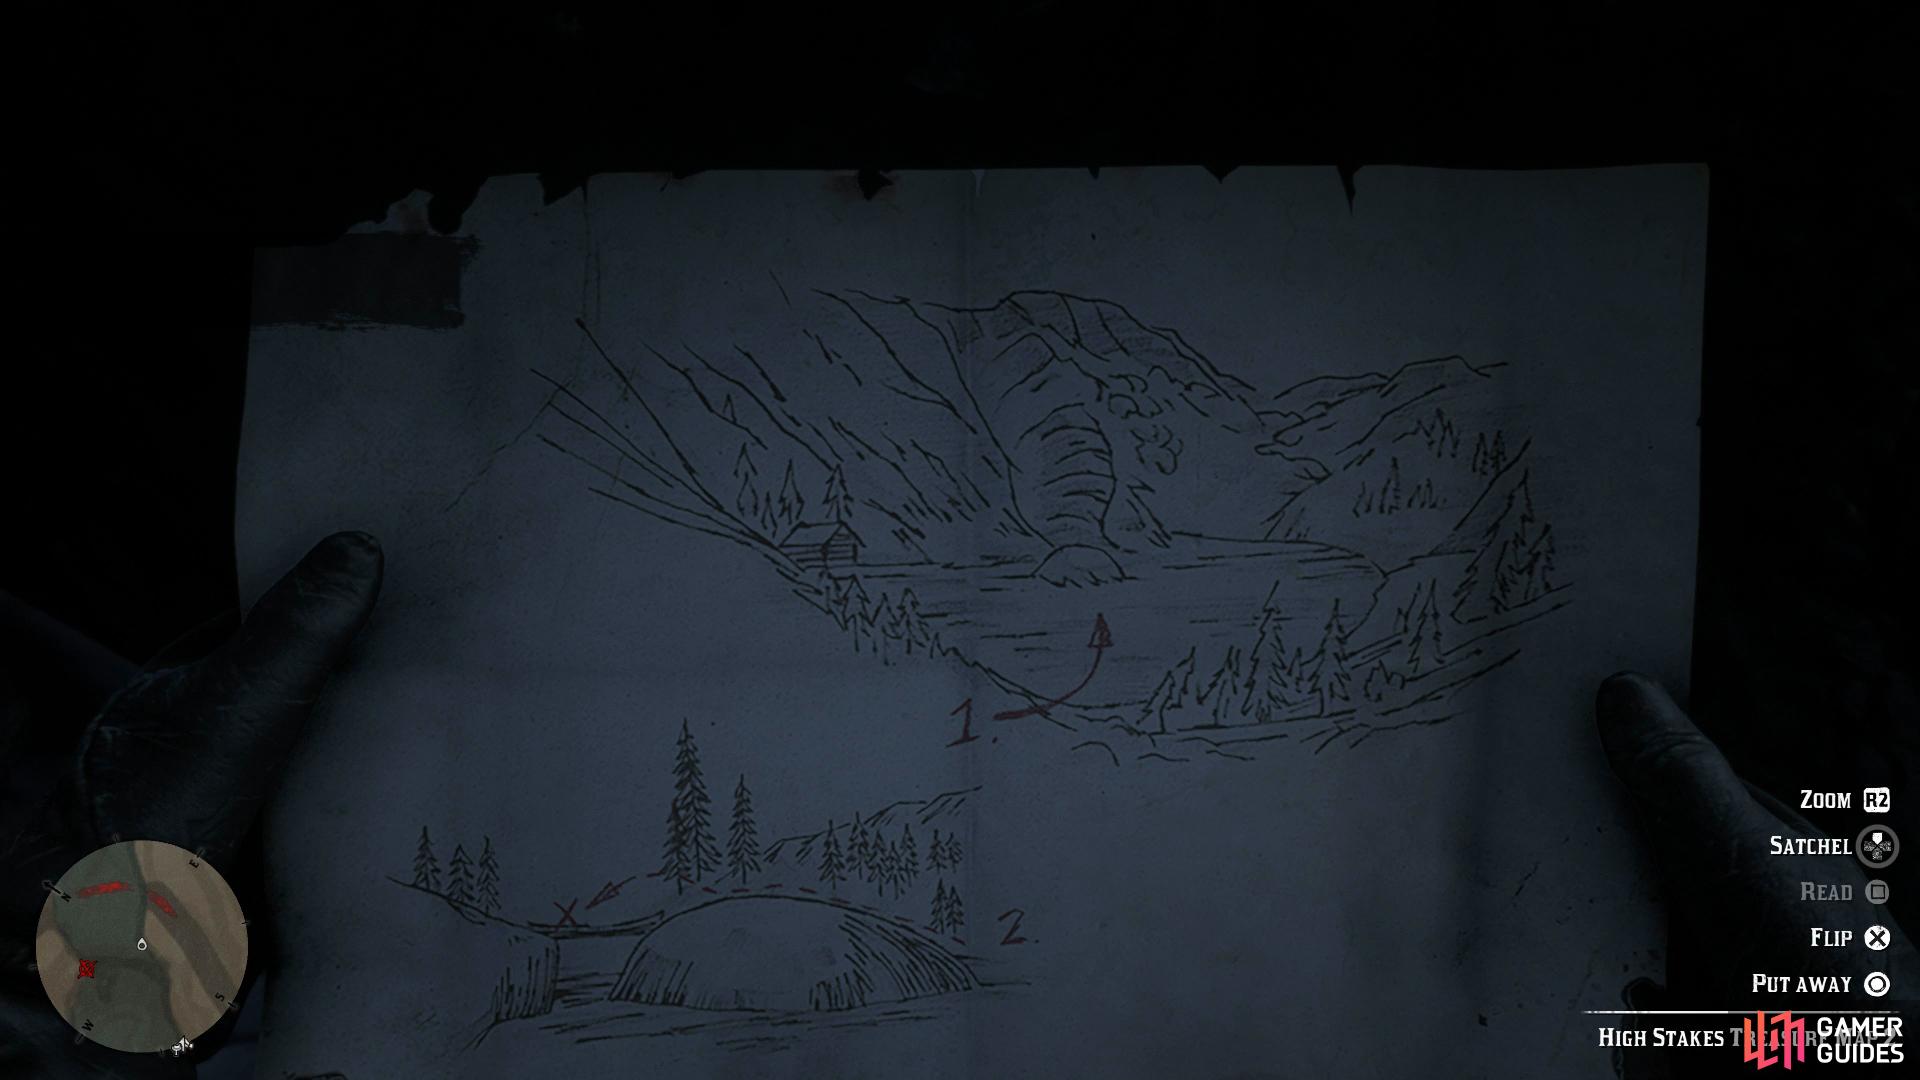 Red Dead Redemption 2 - Sketched Treasure Map 